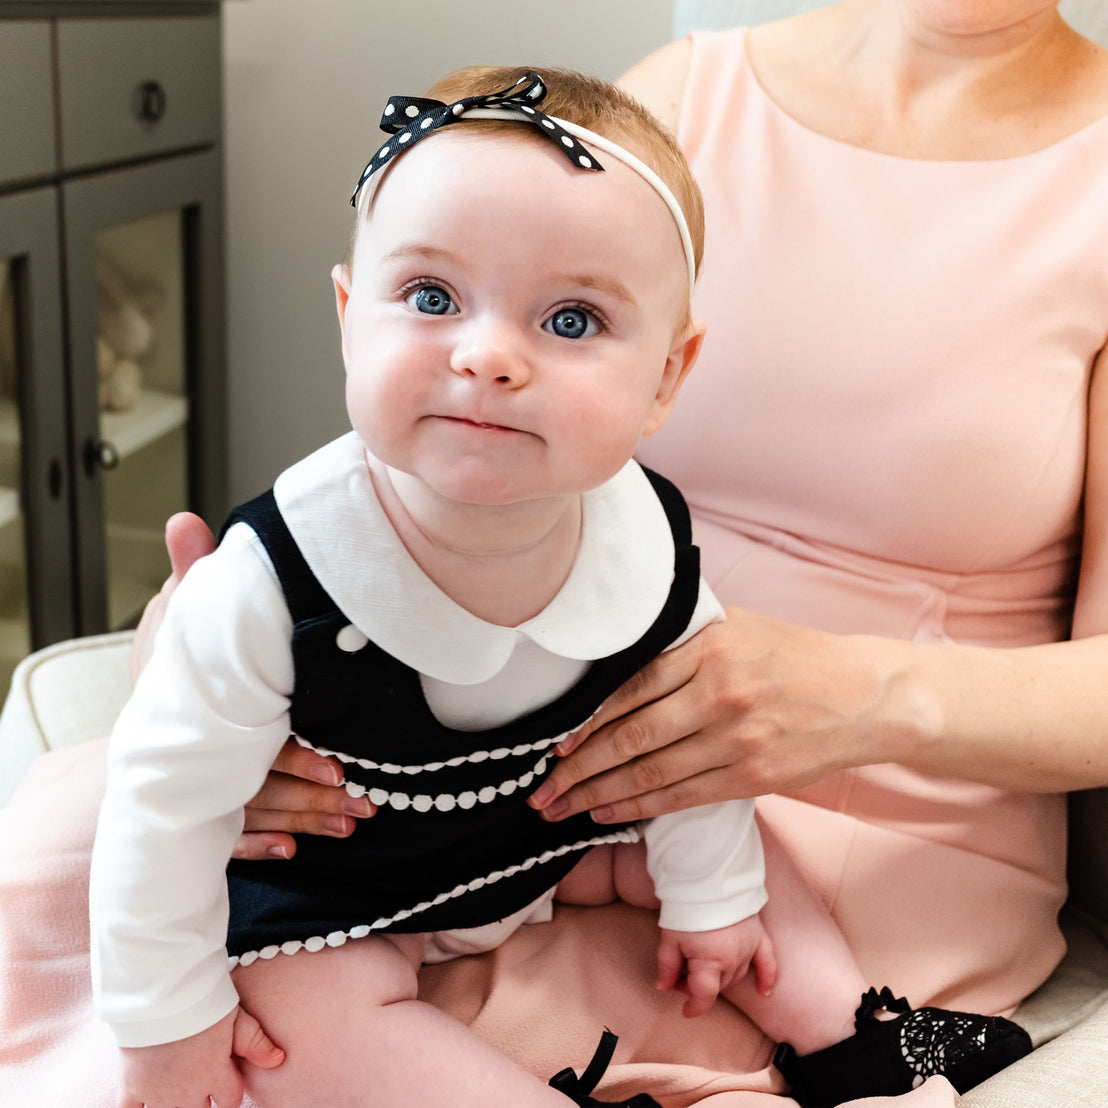 A baby with blue eyes and a stylish black and white dress sits on the lap of a woman in a pink blouse, both looking towards the camera. The baby wears black June booties and appears curious.